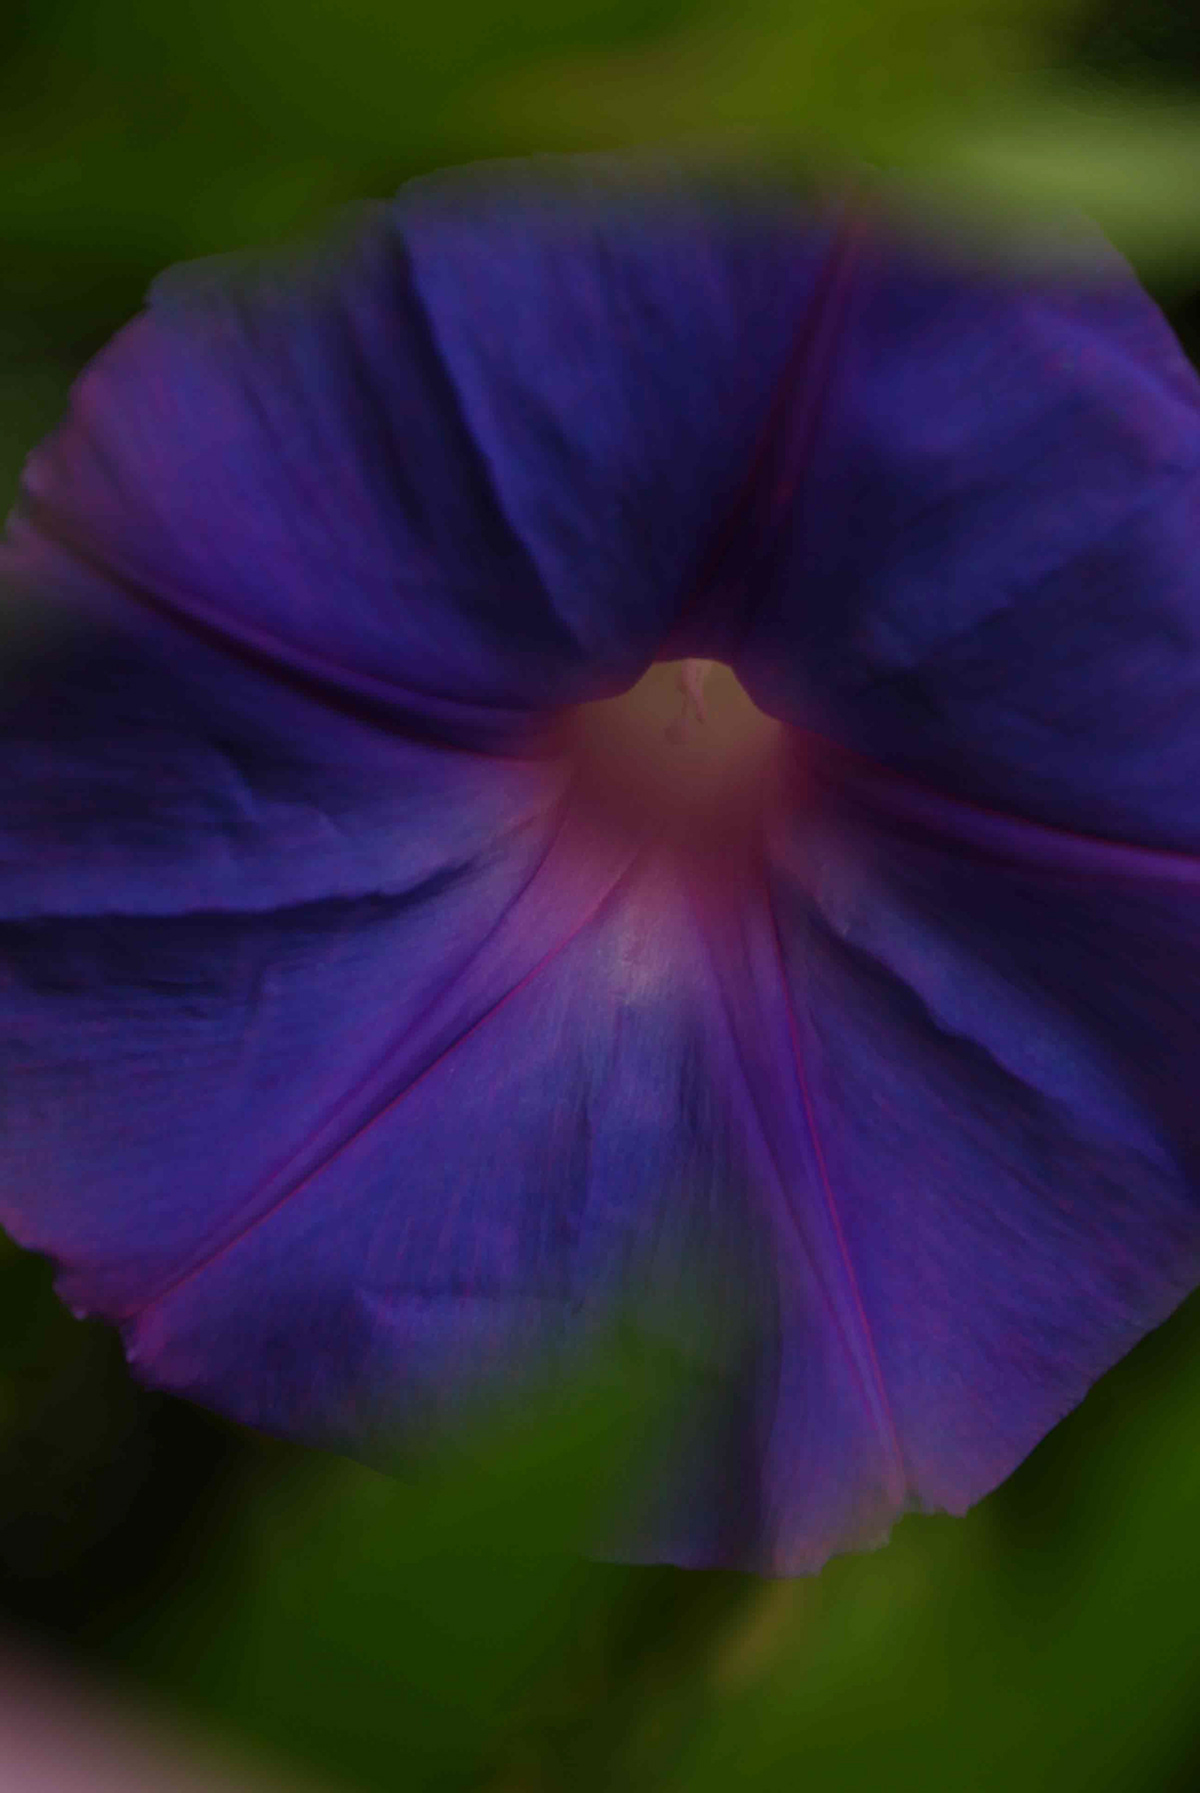 morning glory flower purple dancer California Classic Nature exotic Los Angeles natural ballerina blue colorful vibrant